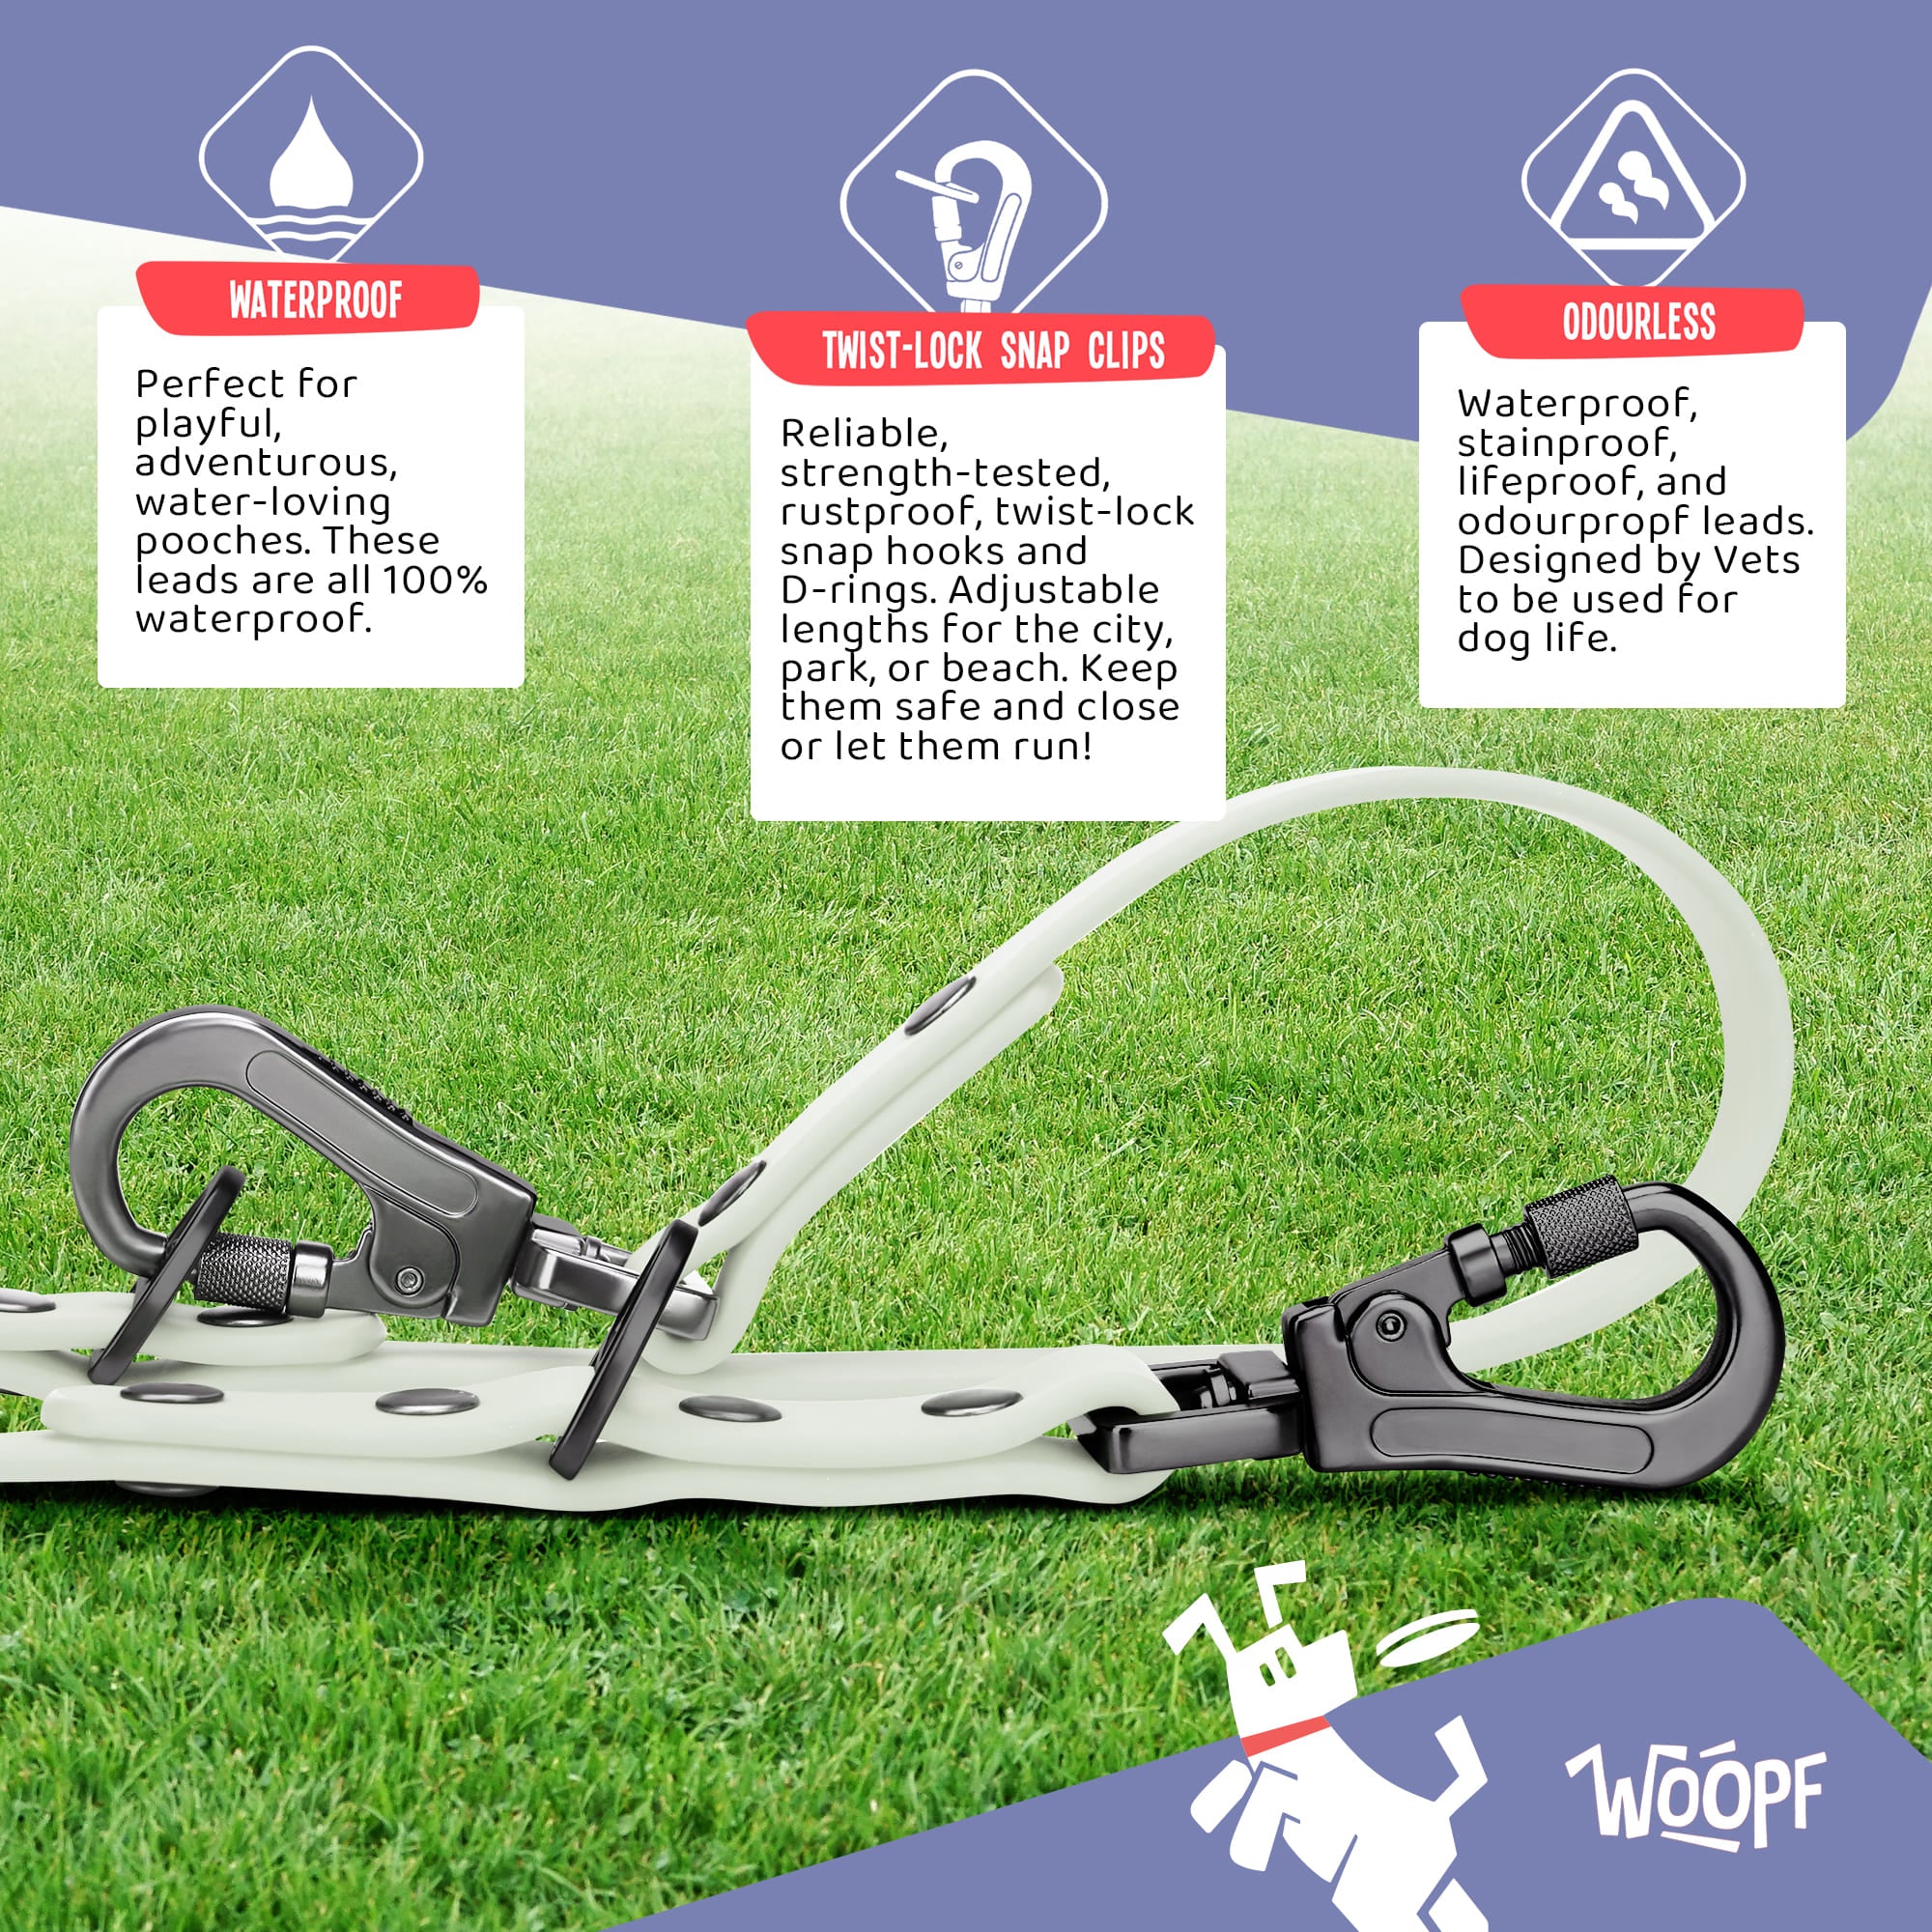 WOOPF Waterproof, All Weather, Strong and Easy to Clean Dog Lead | Small, Medium, and Large Dogs (Glow in the Dark)